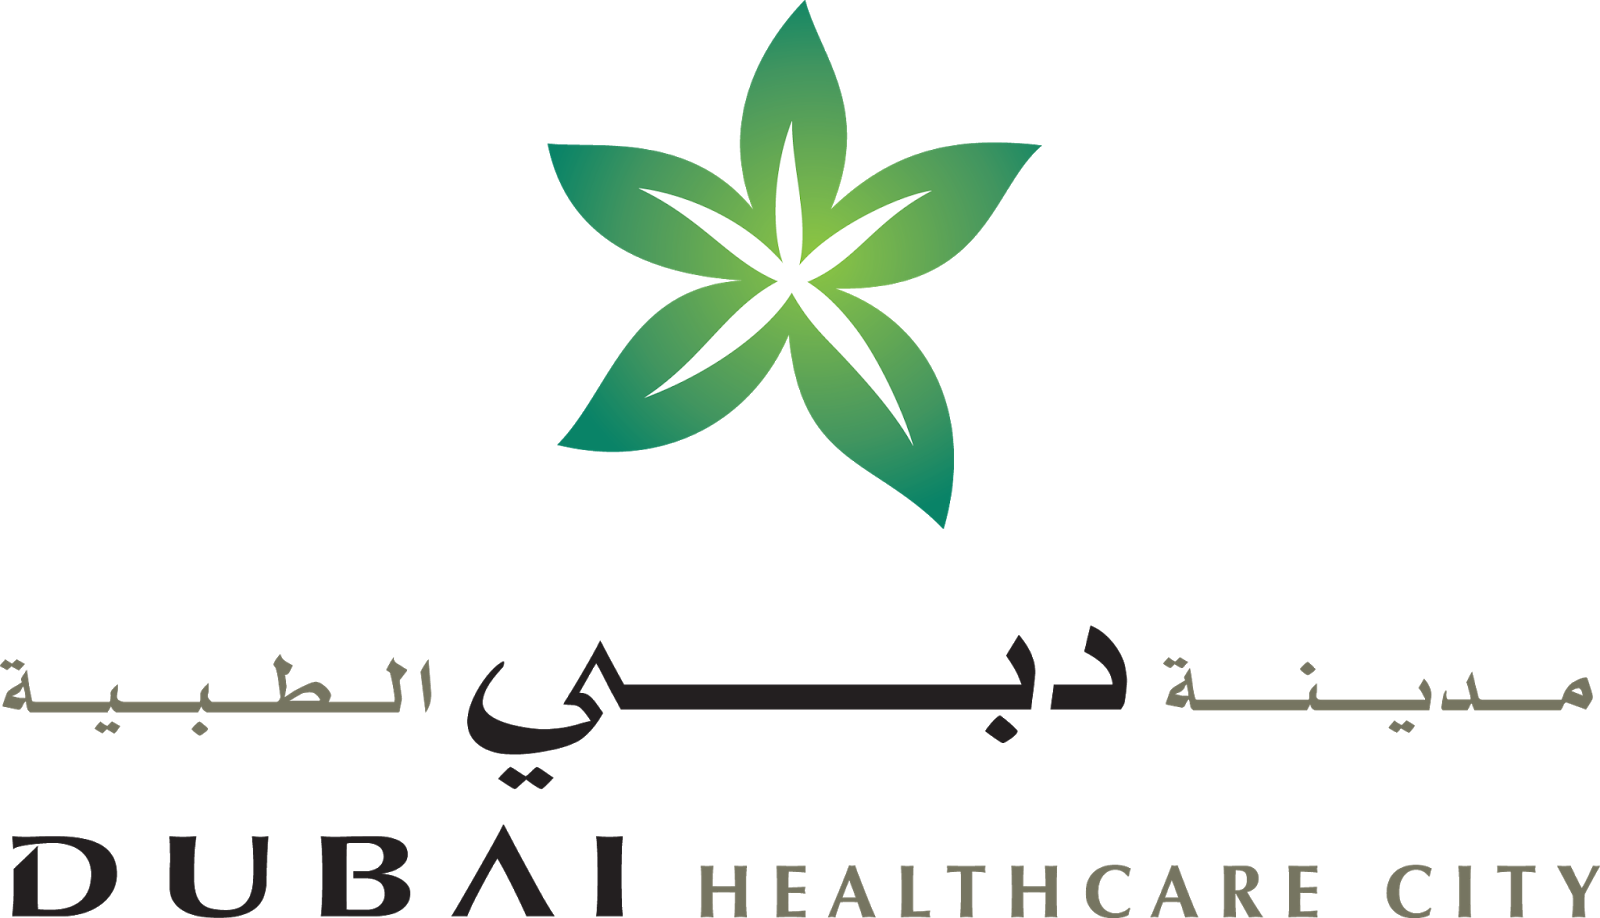 Dubai Healthcare City Was Launched In 2002 By The Uae - Dubai Healthcare City Logo (1600x918)